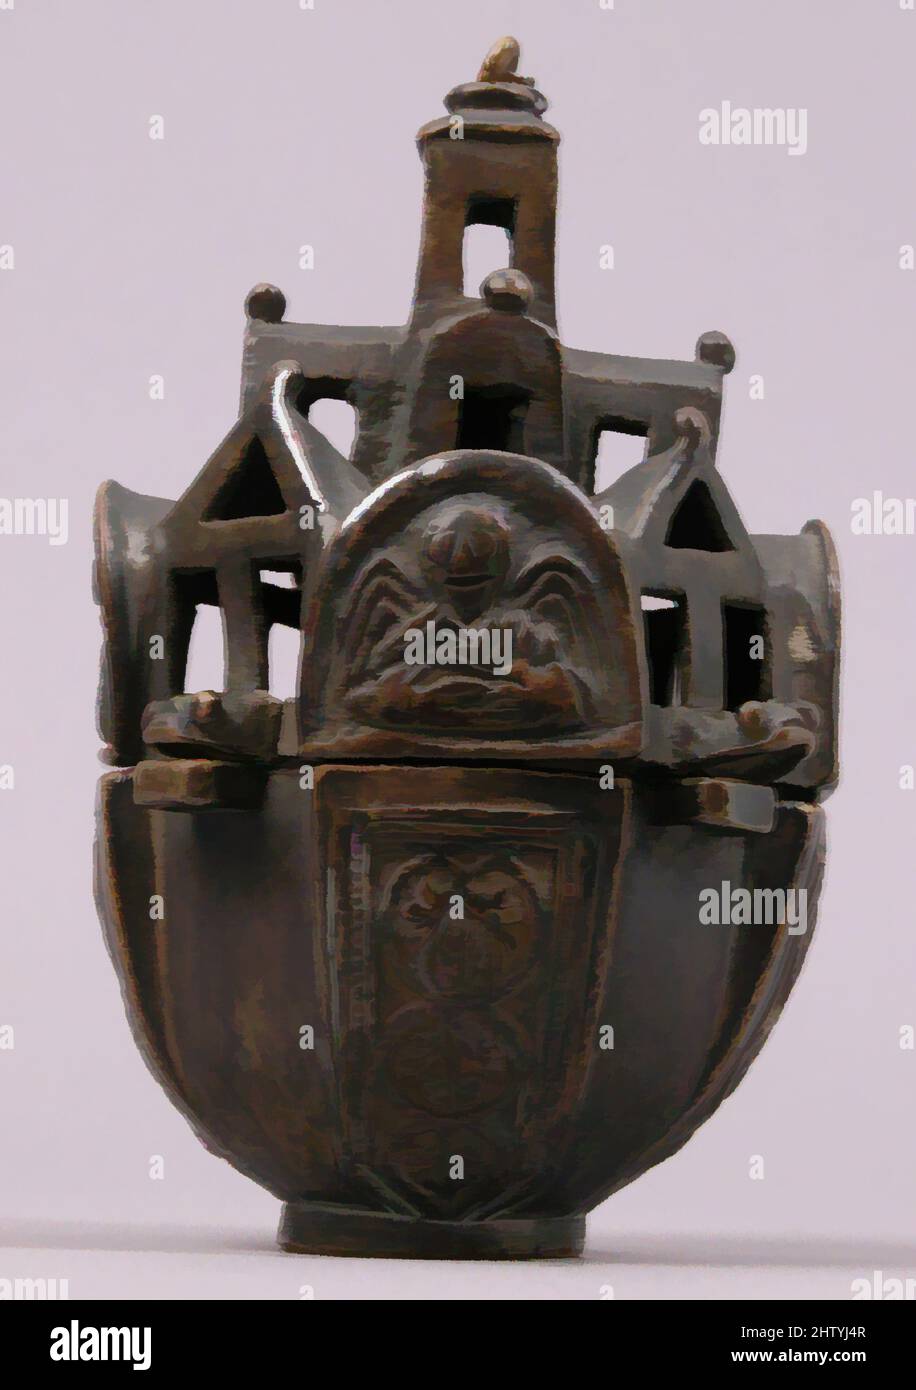 Art inspired by Censer, 12th century, German, Copper alloy, Overall: 7 7/8 x 5 9/16 in. (20 x 14.2 cm), Metalwork-Copper alloy, Classic works modernized by Artotop with a splash of modernity. Shapes, color and value, eye-catching visual impact on art. Emotions through freedom of artworks in a contemporary way. A timeless message pursuing a wildly creative new direction. Artists turning to the digital medium and creating the Artotop NFT Stock Photo